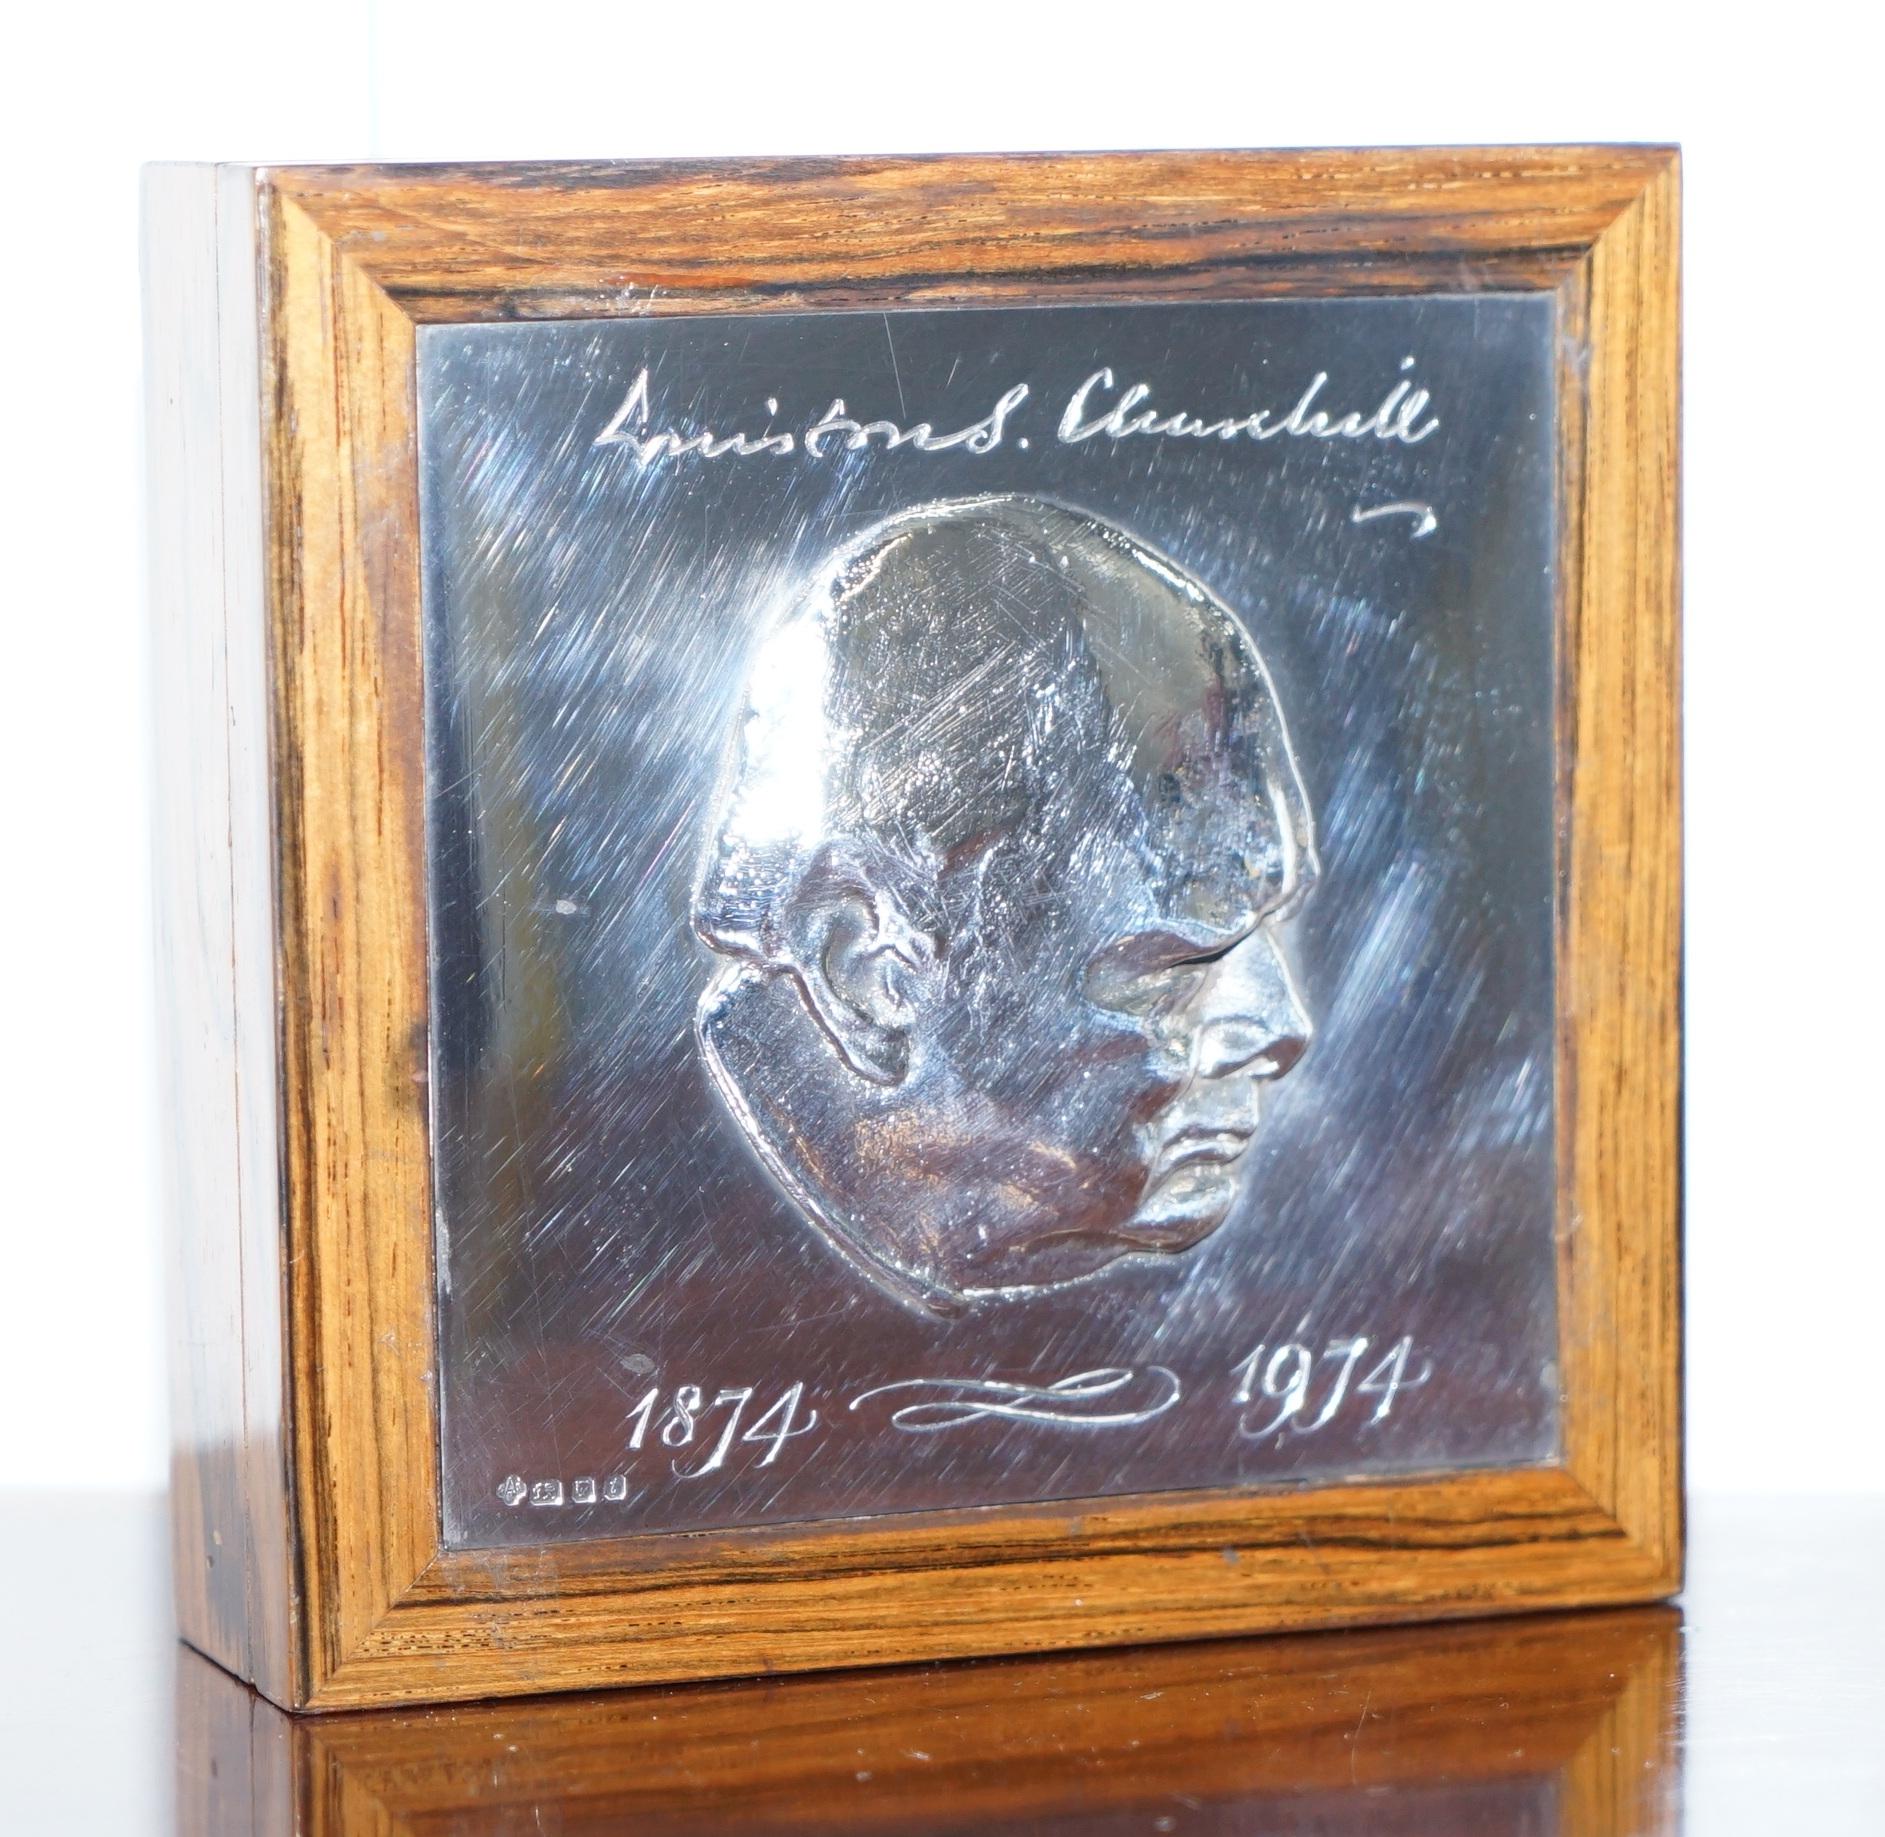 We are delighted to offer for sale this very rare Calamander wood with leather back and solid sterling silver Winston Churchill 100th anniversary cigarette/cigar box made and retailed by Asprey London

A very good looking well made and decorative